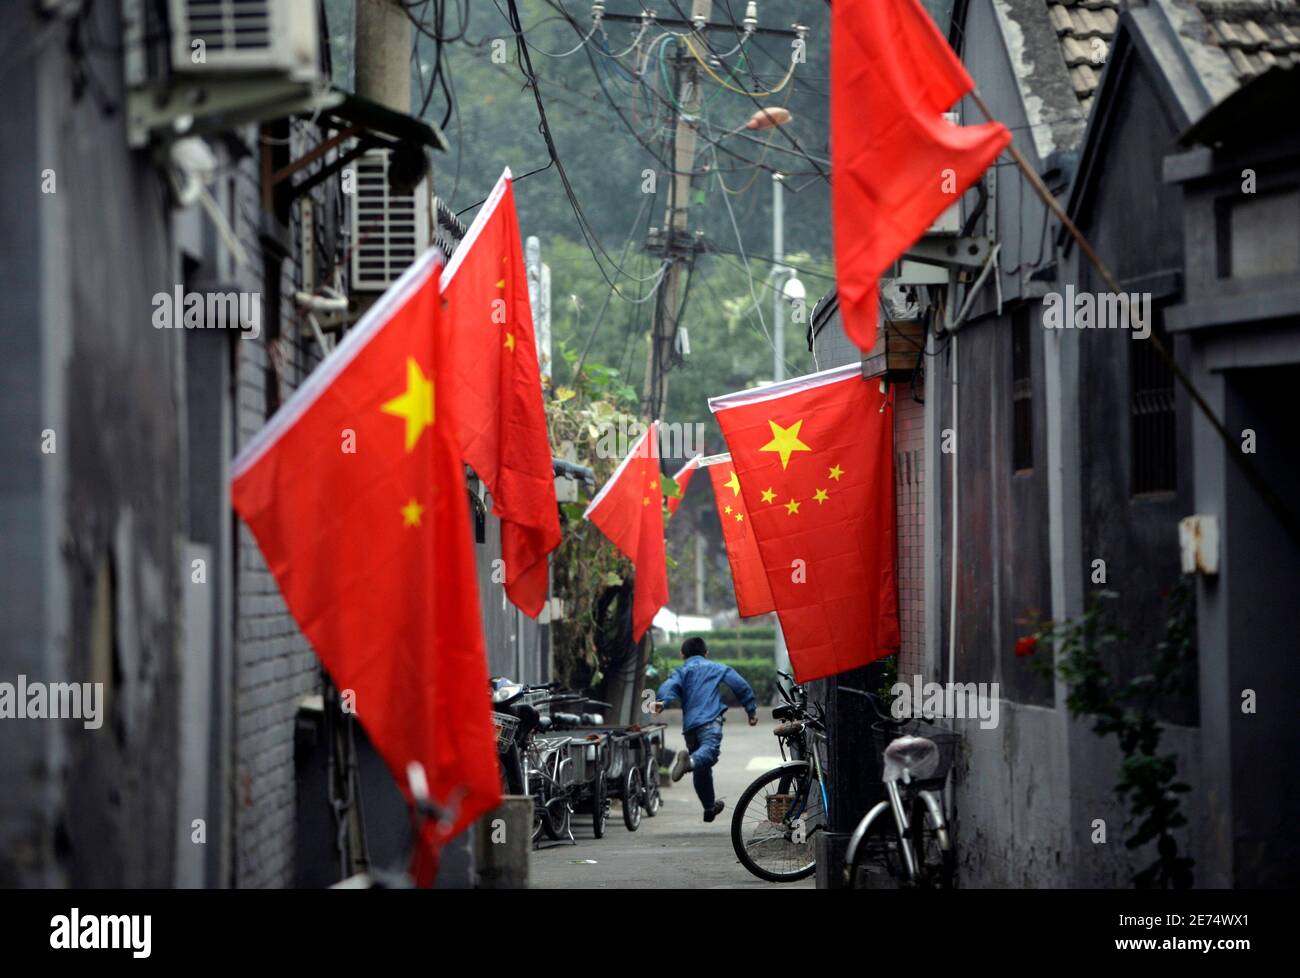 A boy runs along an old Hutong decorated with Chinese national flags to celebrate the upcoming October's 60th anniversary of the founding of the People's Republic of China, in central Beijing September 29, 2009. REUTERS/Jason Lee (CHINA SOCIETY ANNIVERSARY) Stock Photo